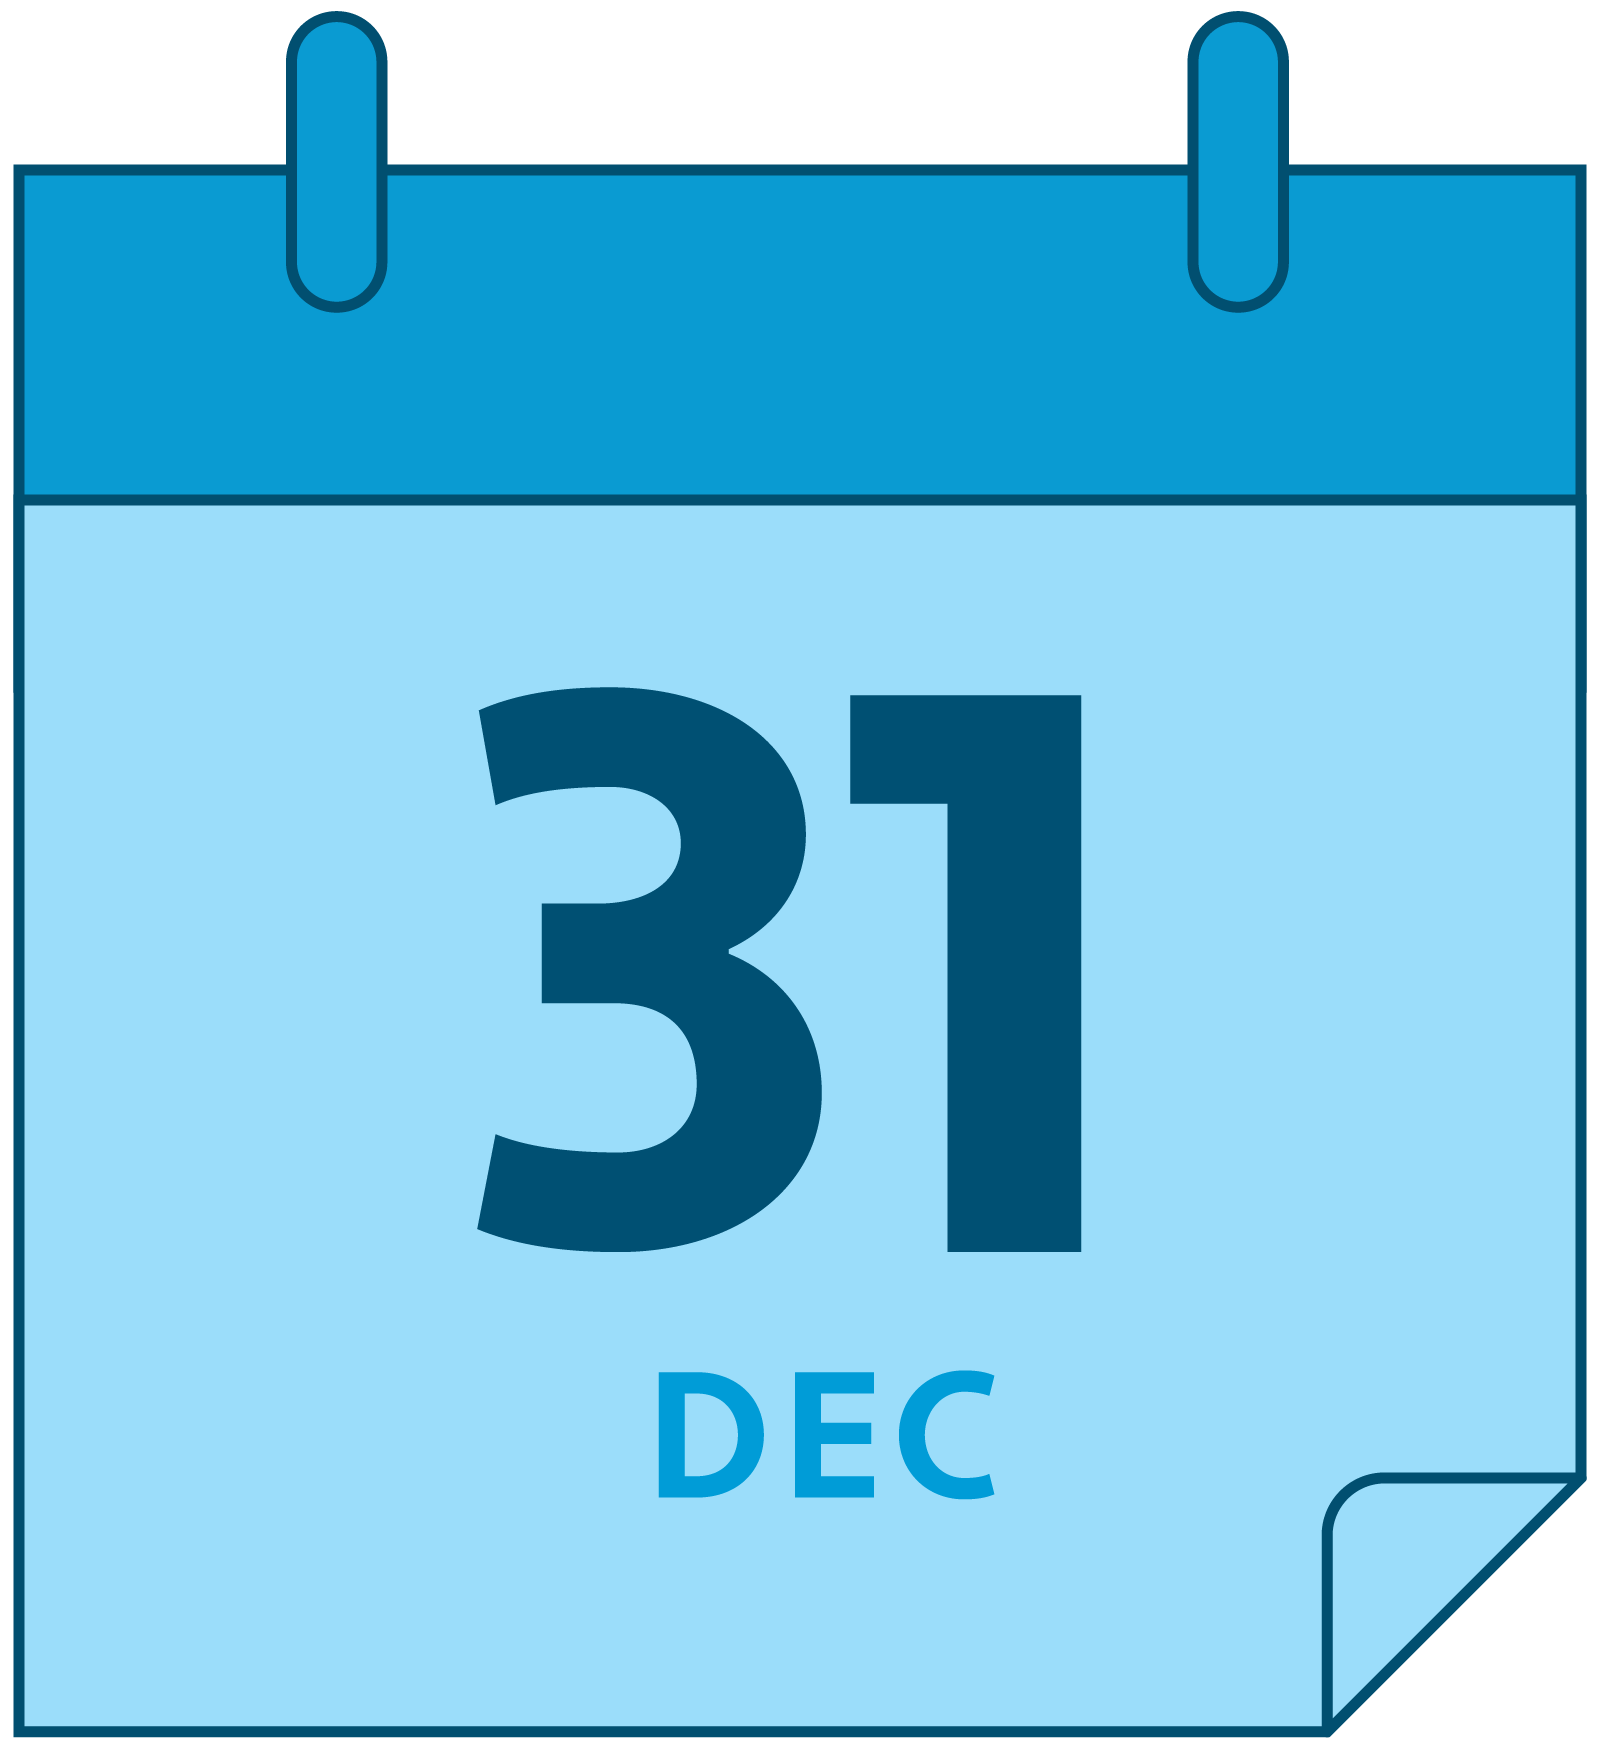 A day-to-day calendar dated December 31.